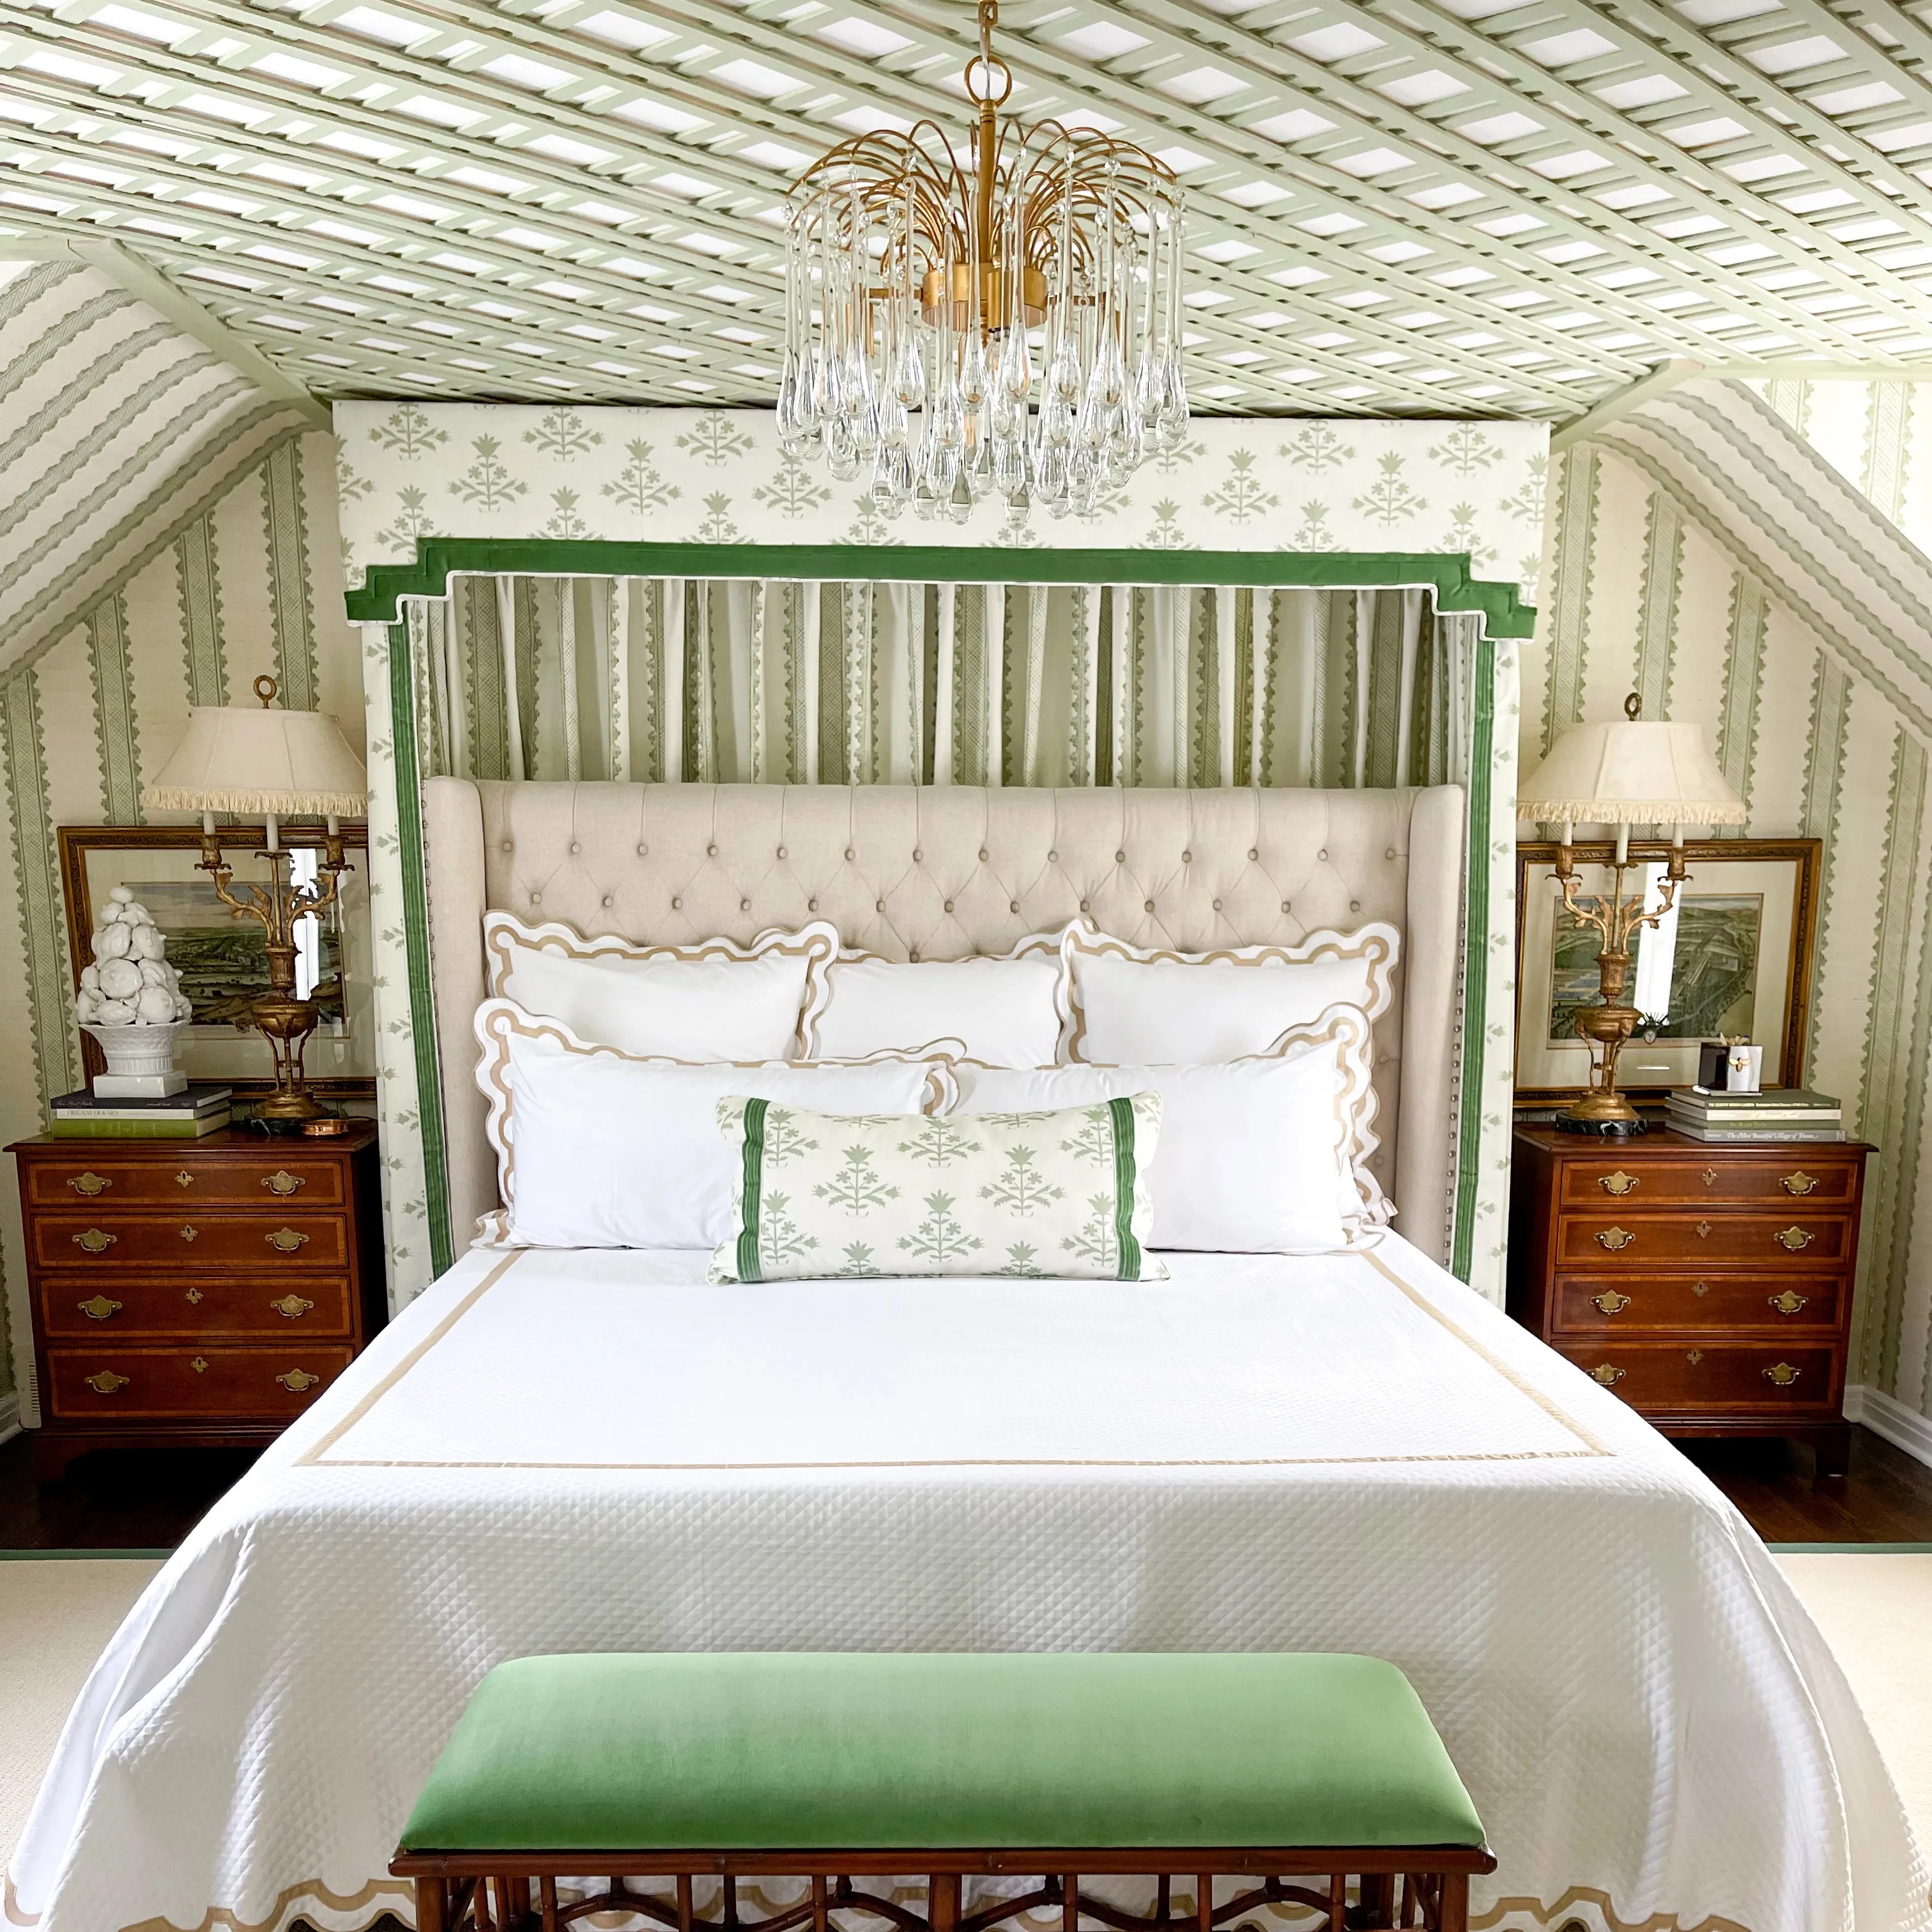 Grandmillennial room with green wallpaper on the walls and ceiling